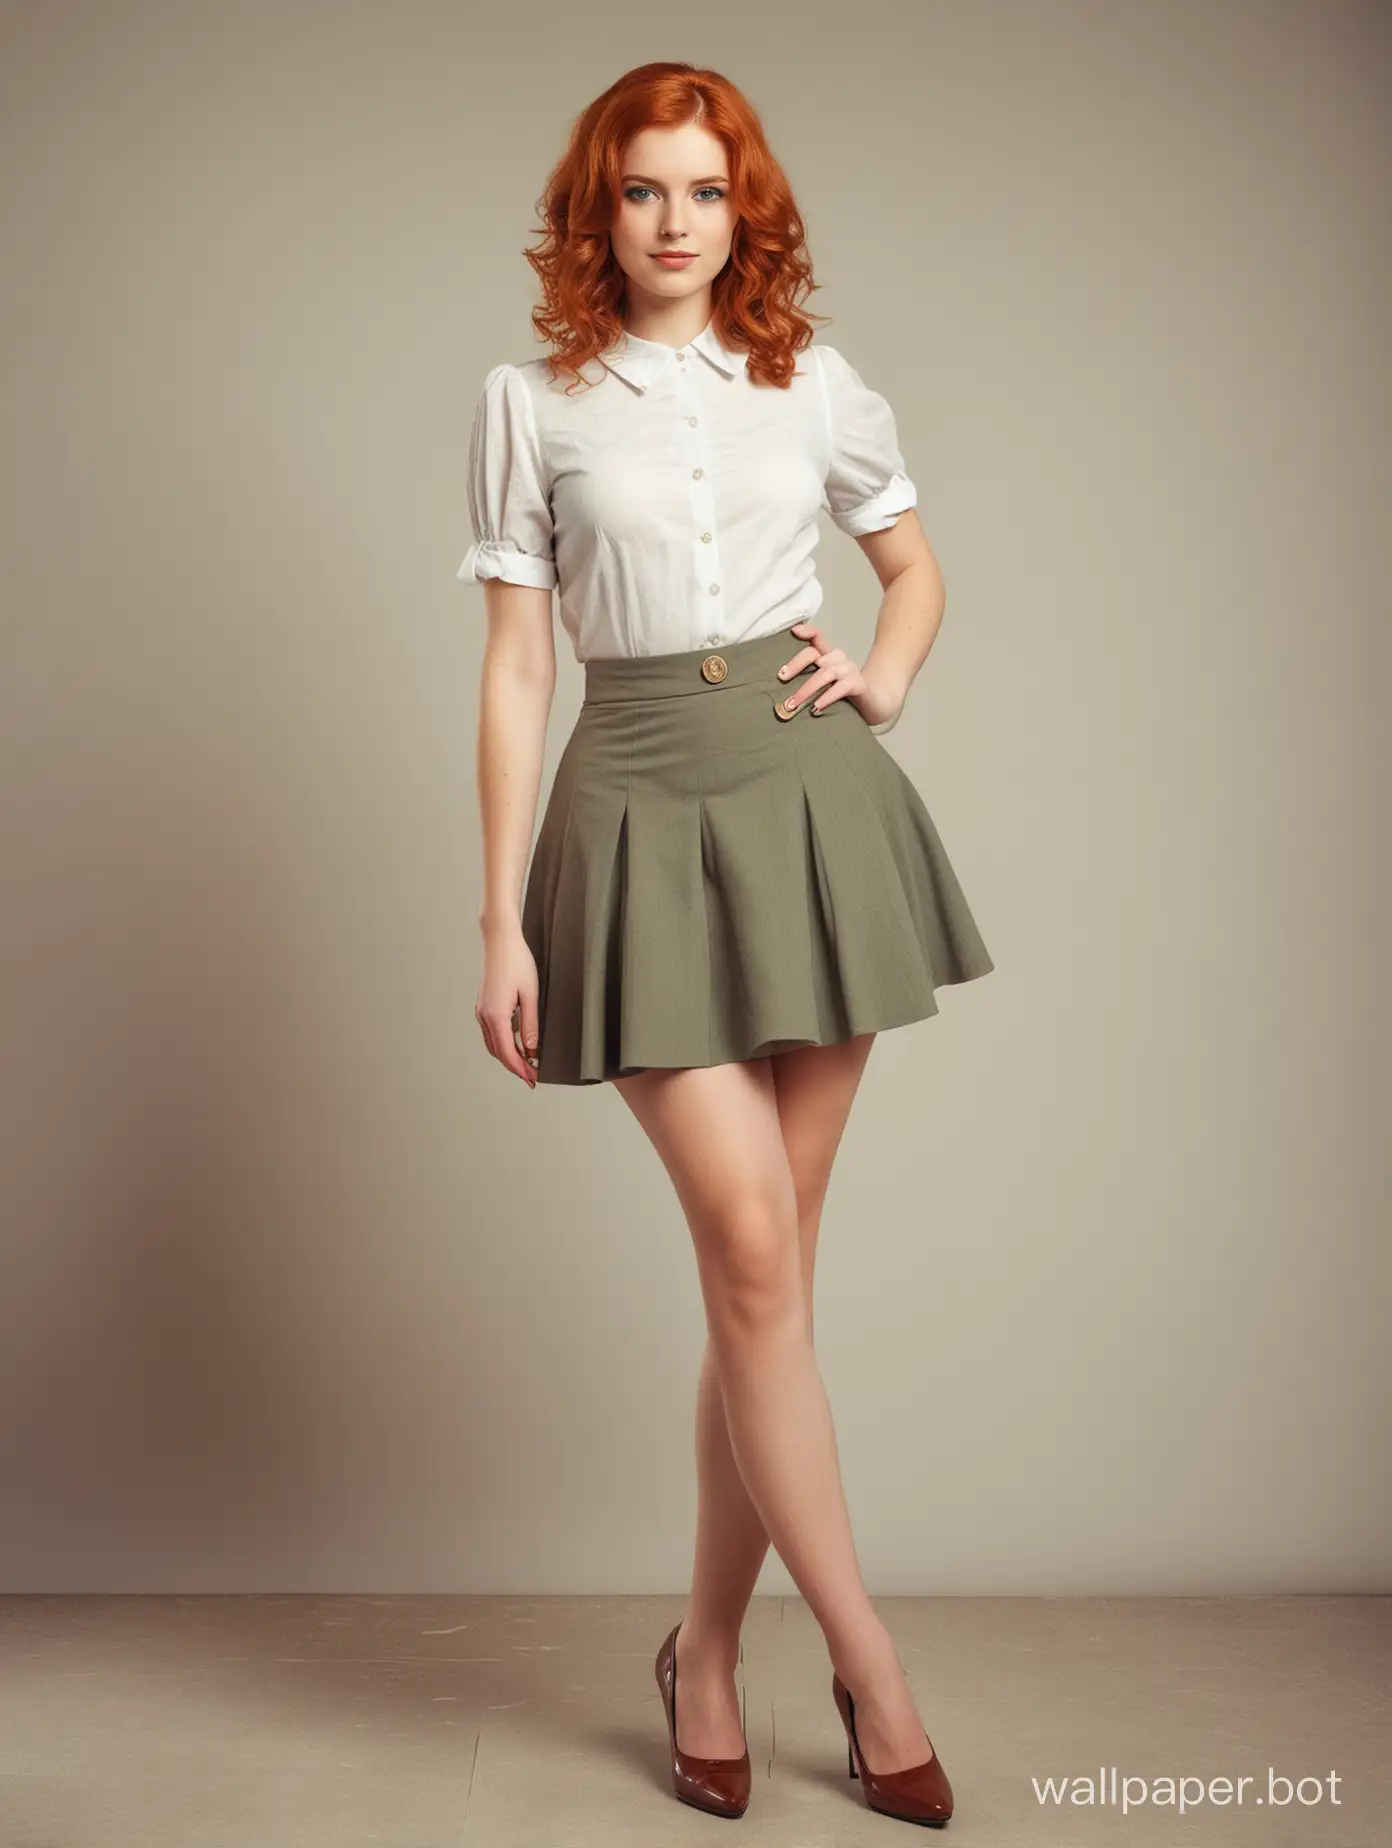 Vintage-Style-Redhead-Woman-in-Short-Skirt-and-Wedge-Heels